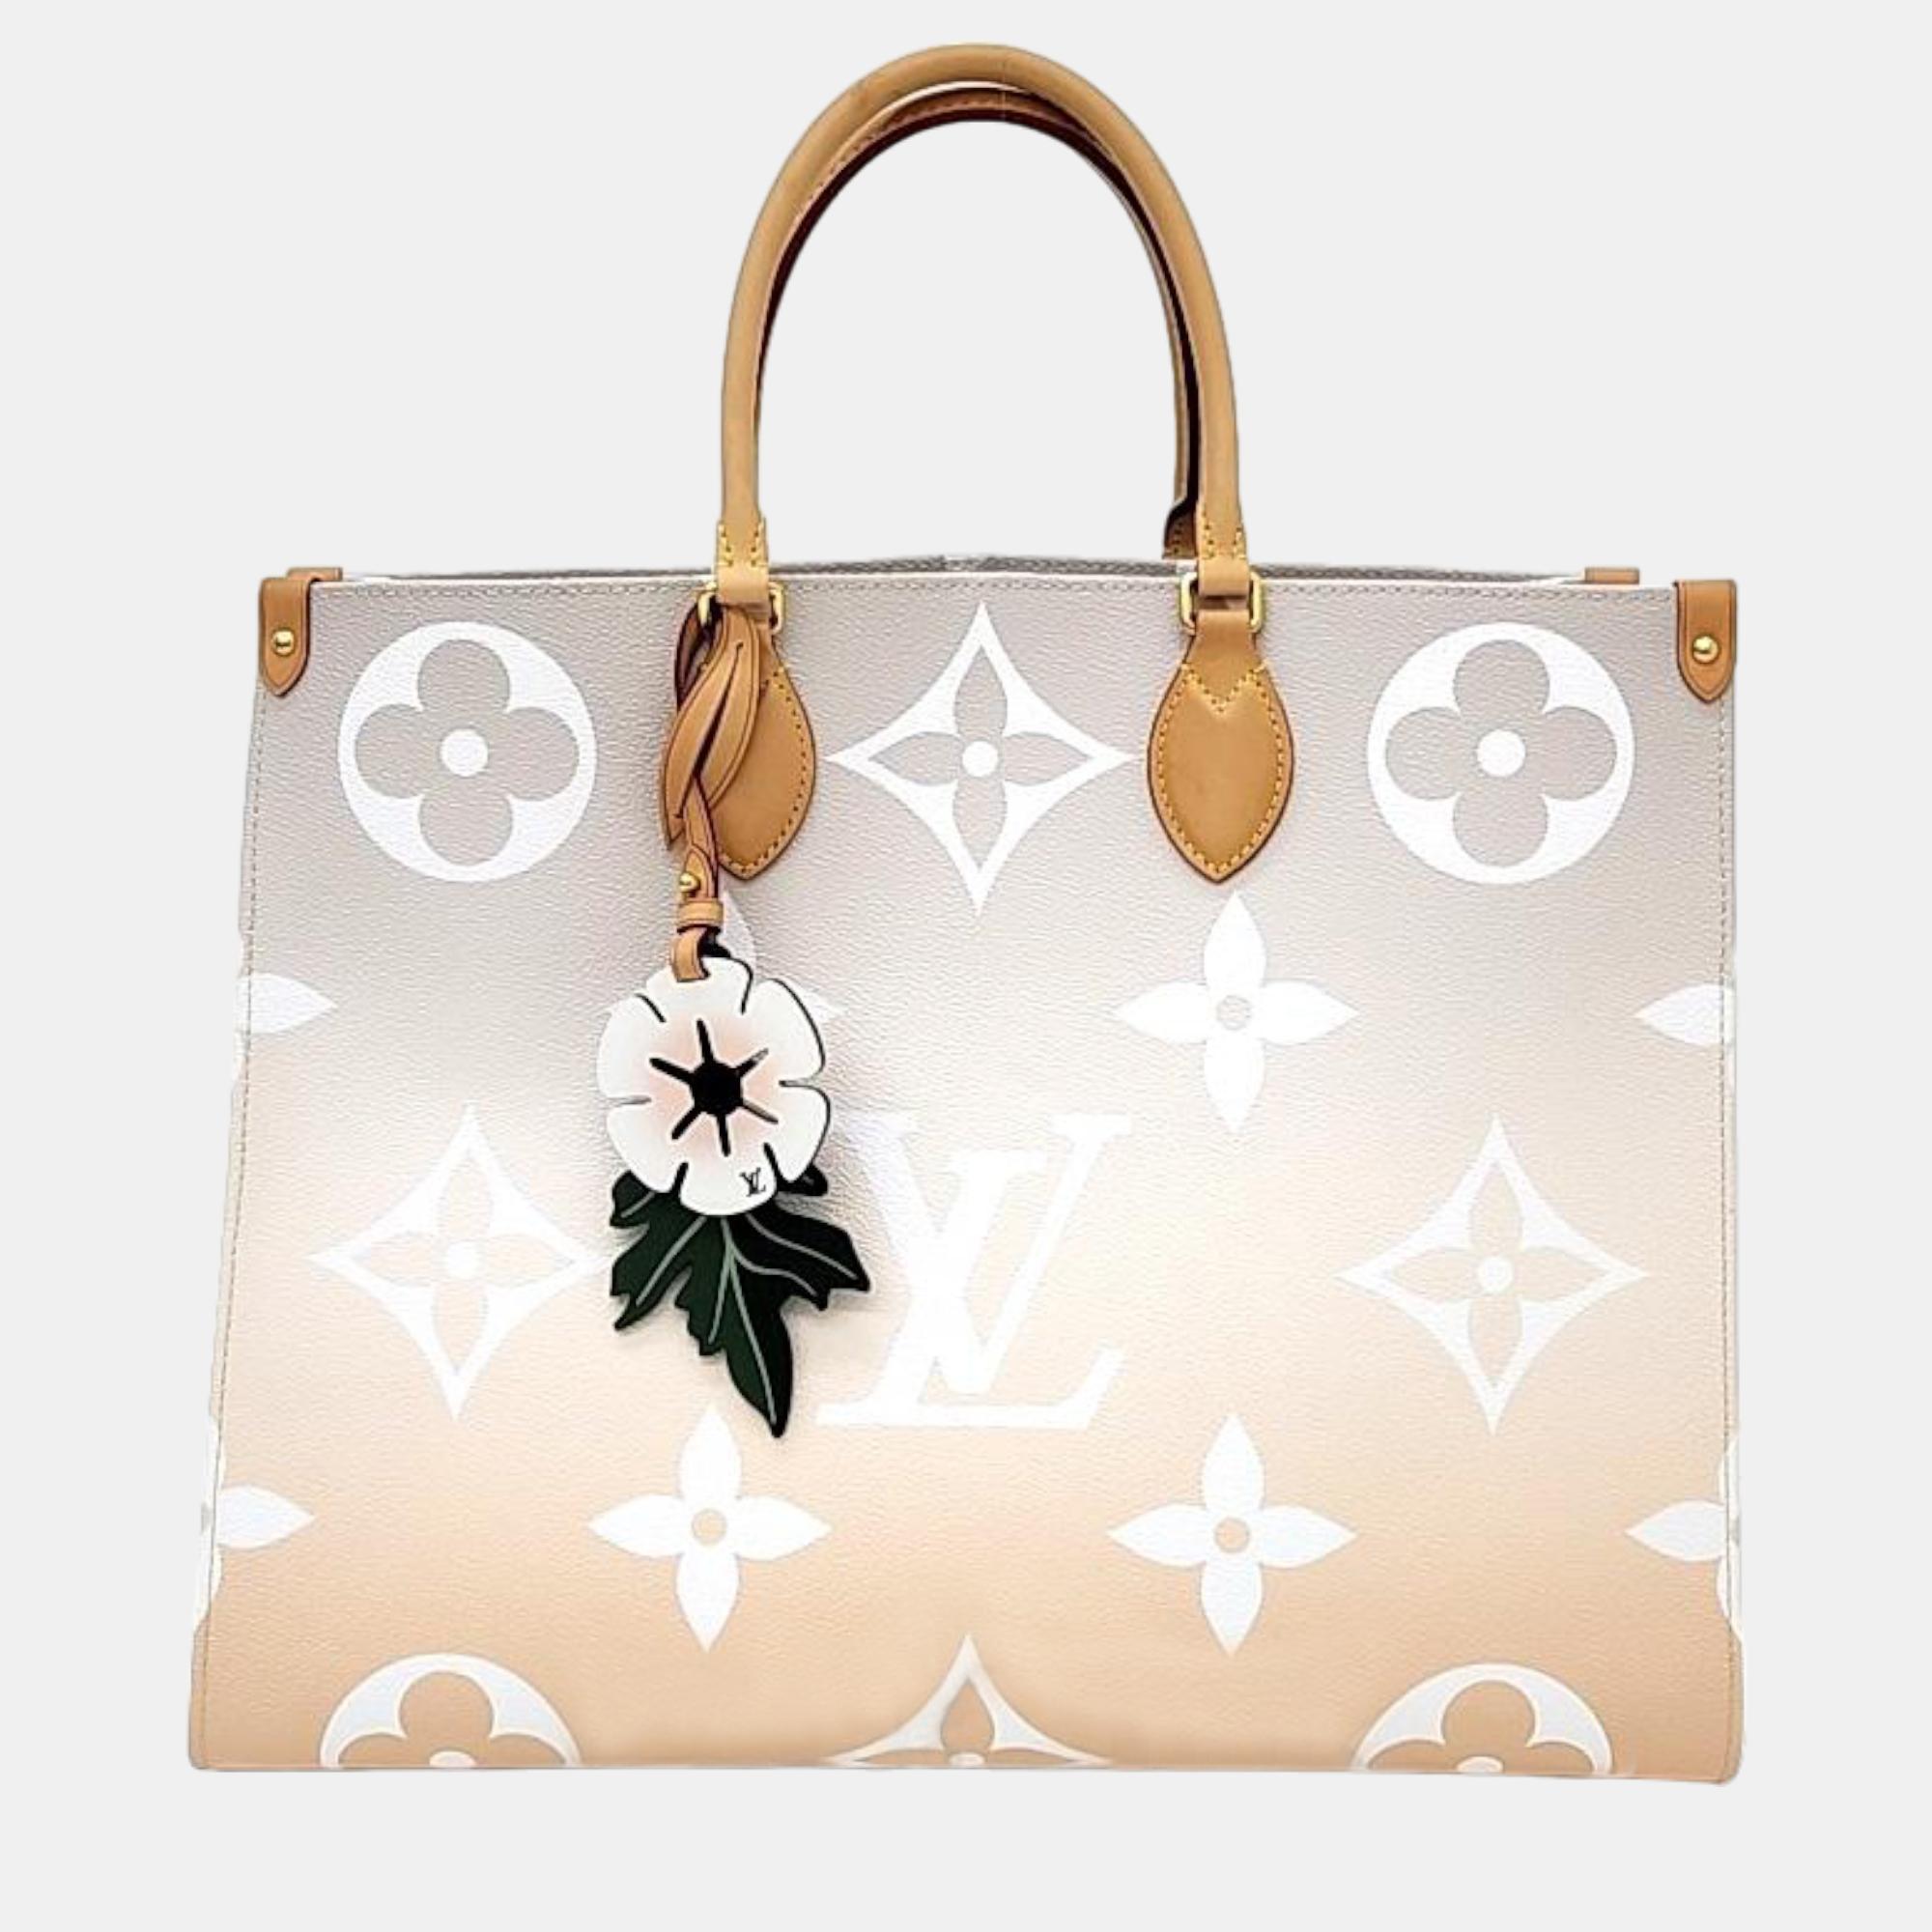 Louis vuitton light peach monogram giant canvas  on the go by the pool tote bag